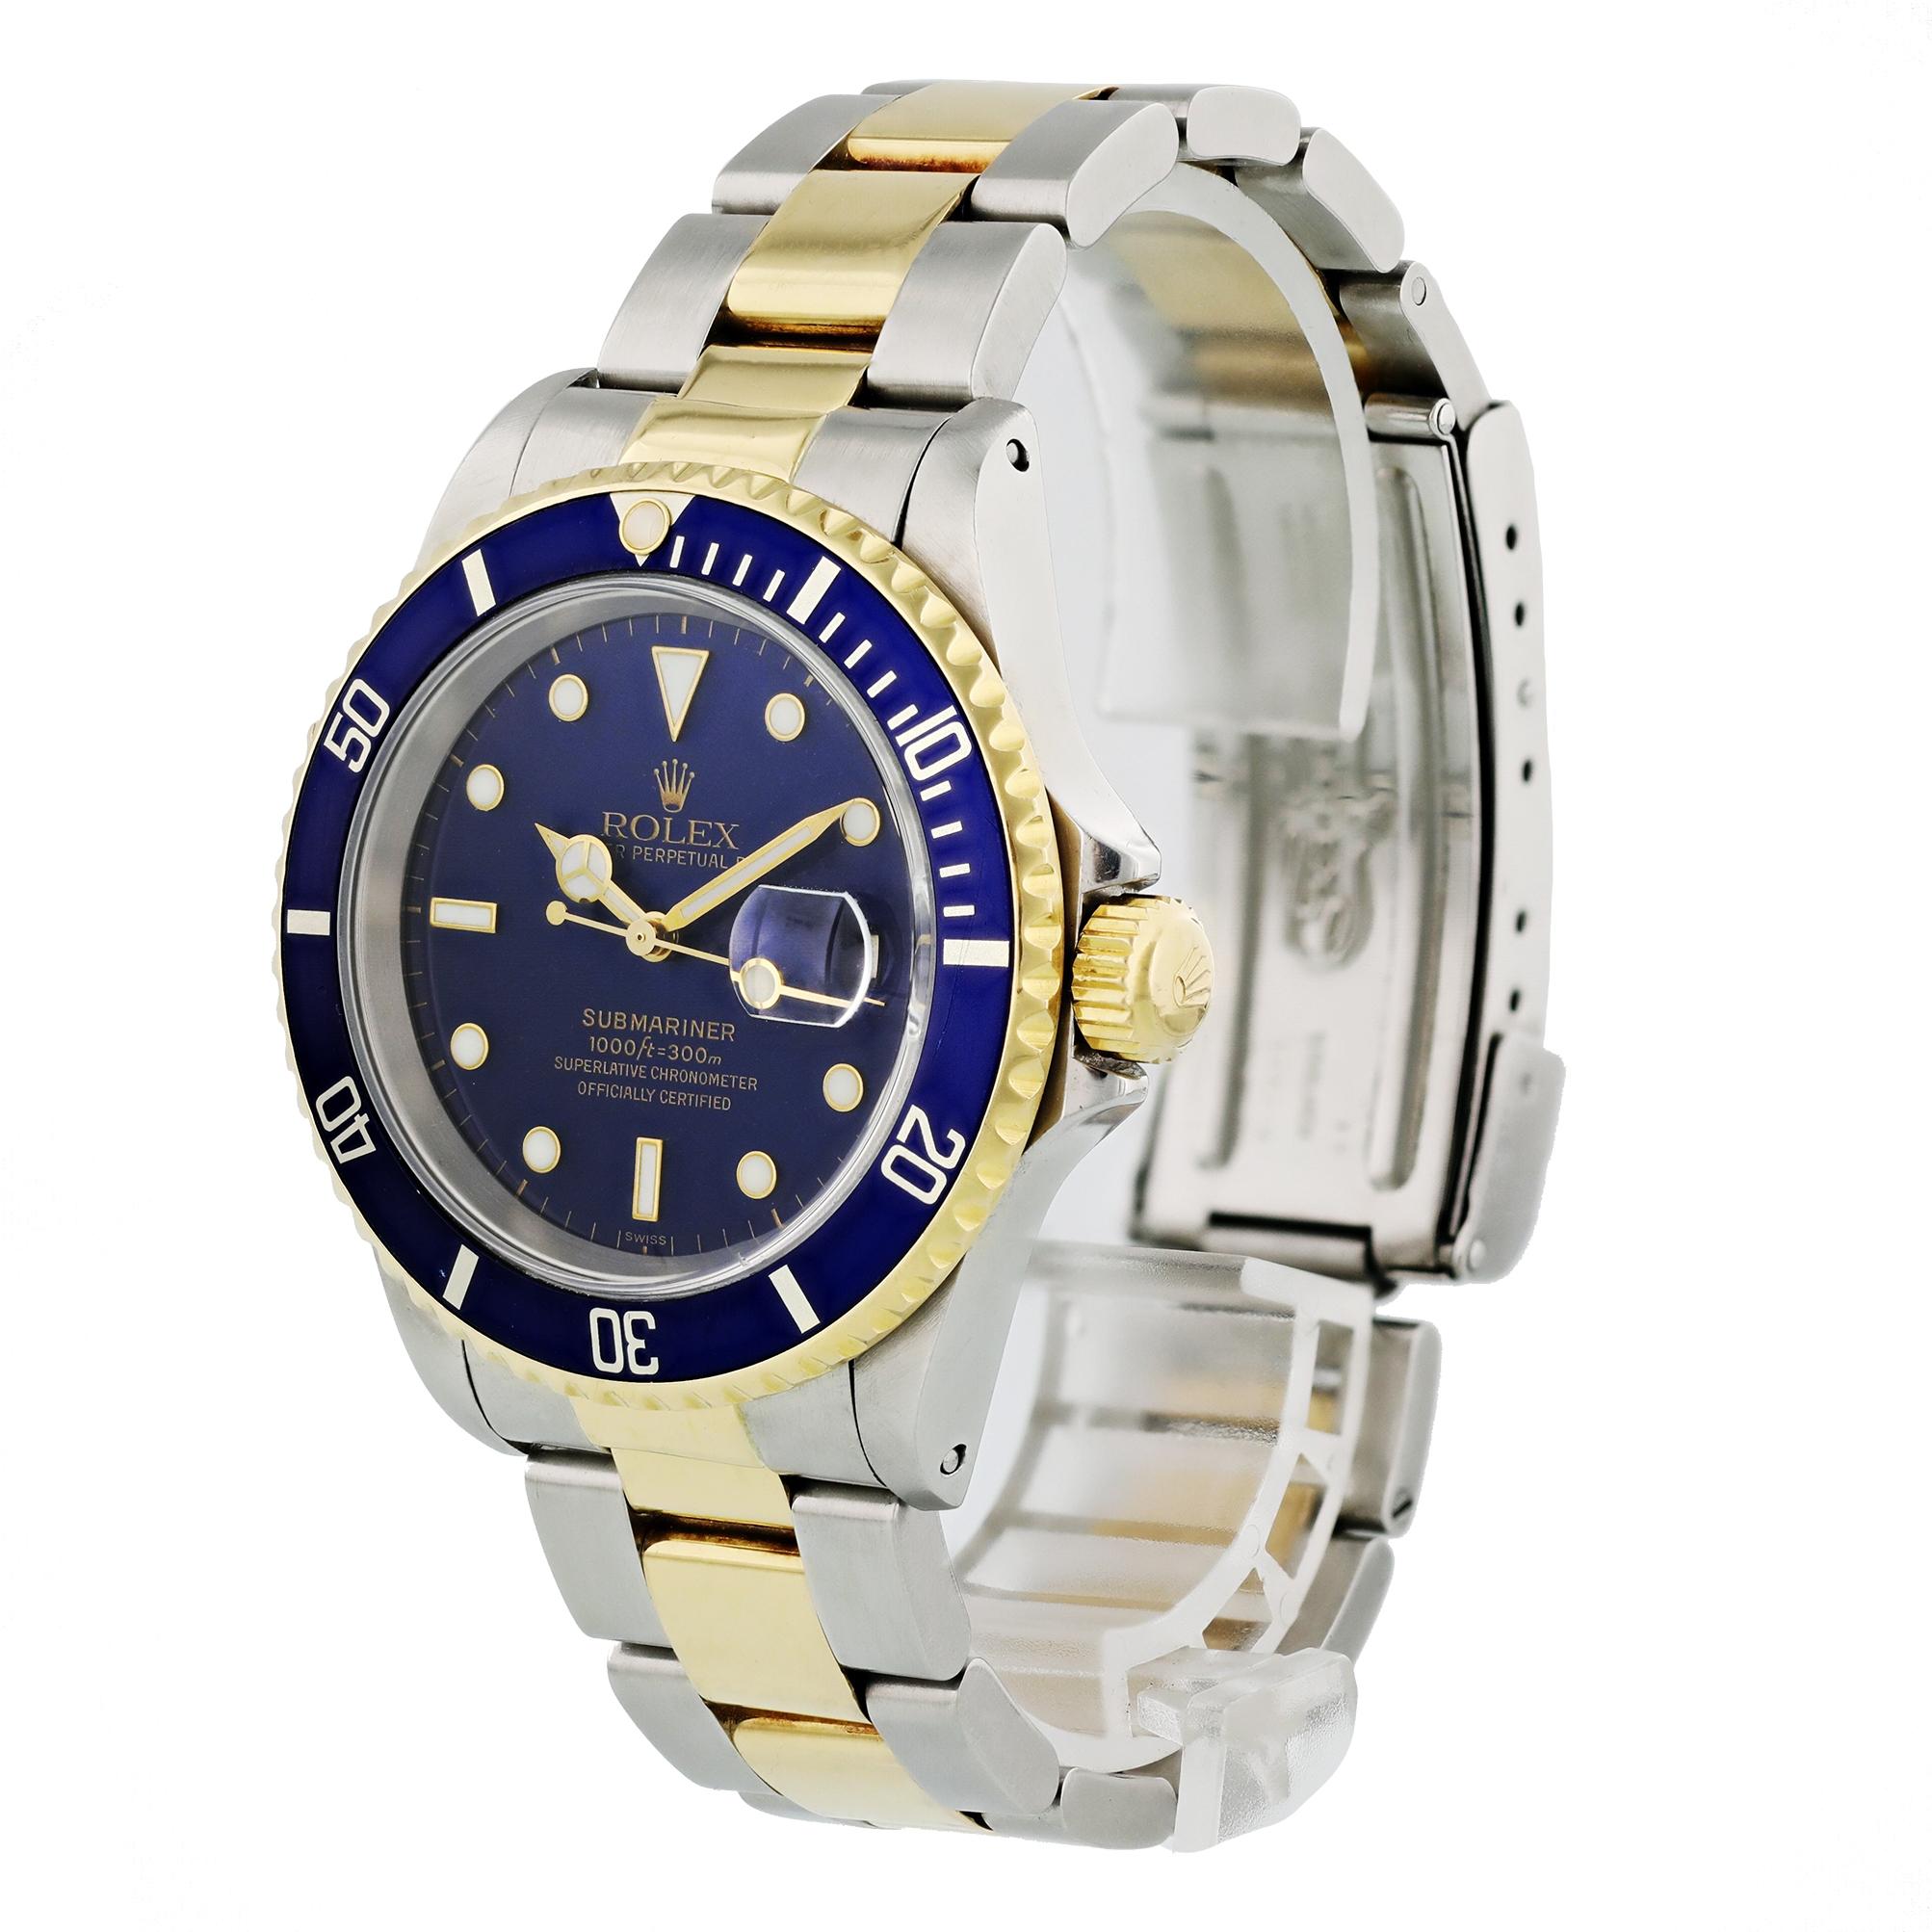 Rolex Oyster Perpetual Date Submariner 116613 Mens Watch. 
40mm Stainless steel case with Unidirectional rotating 18K yellow gold bezel with a blue top ring. 
Blue dial with yellow gold-tone hands and luminous dot hour markers. 
Minute markers